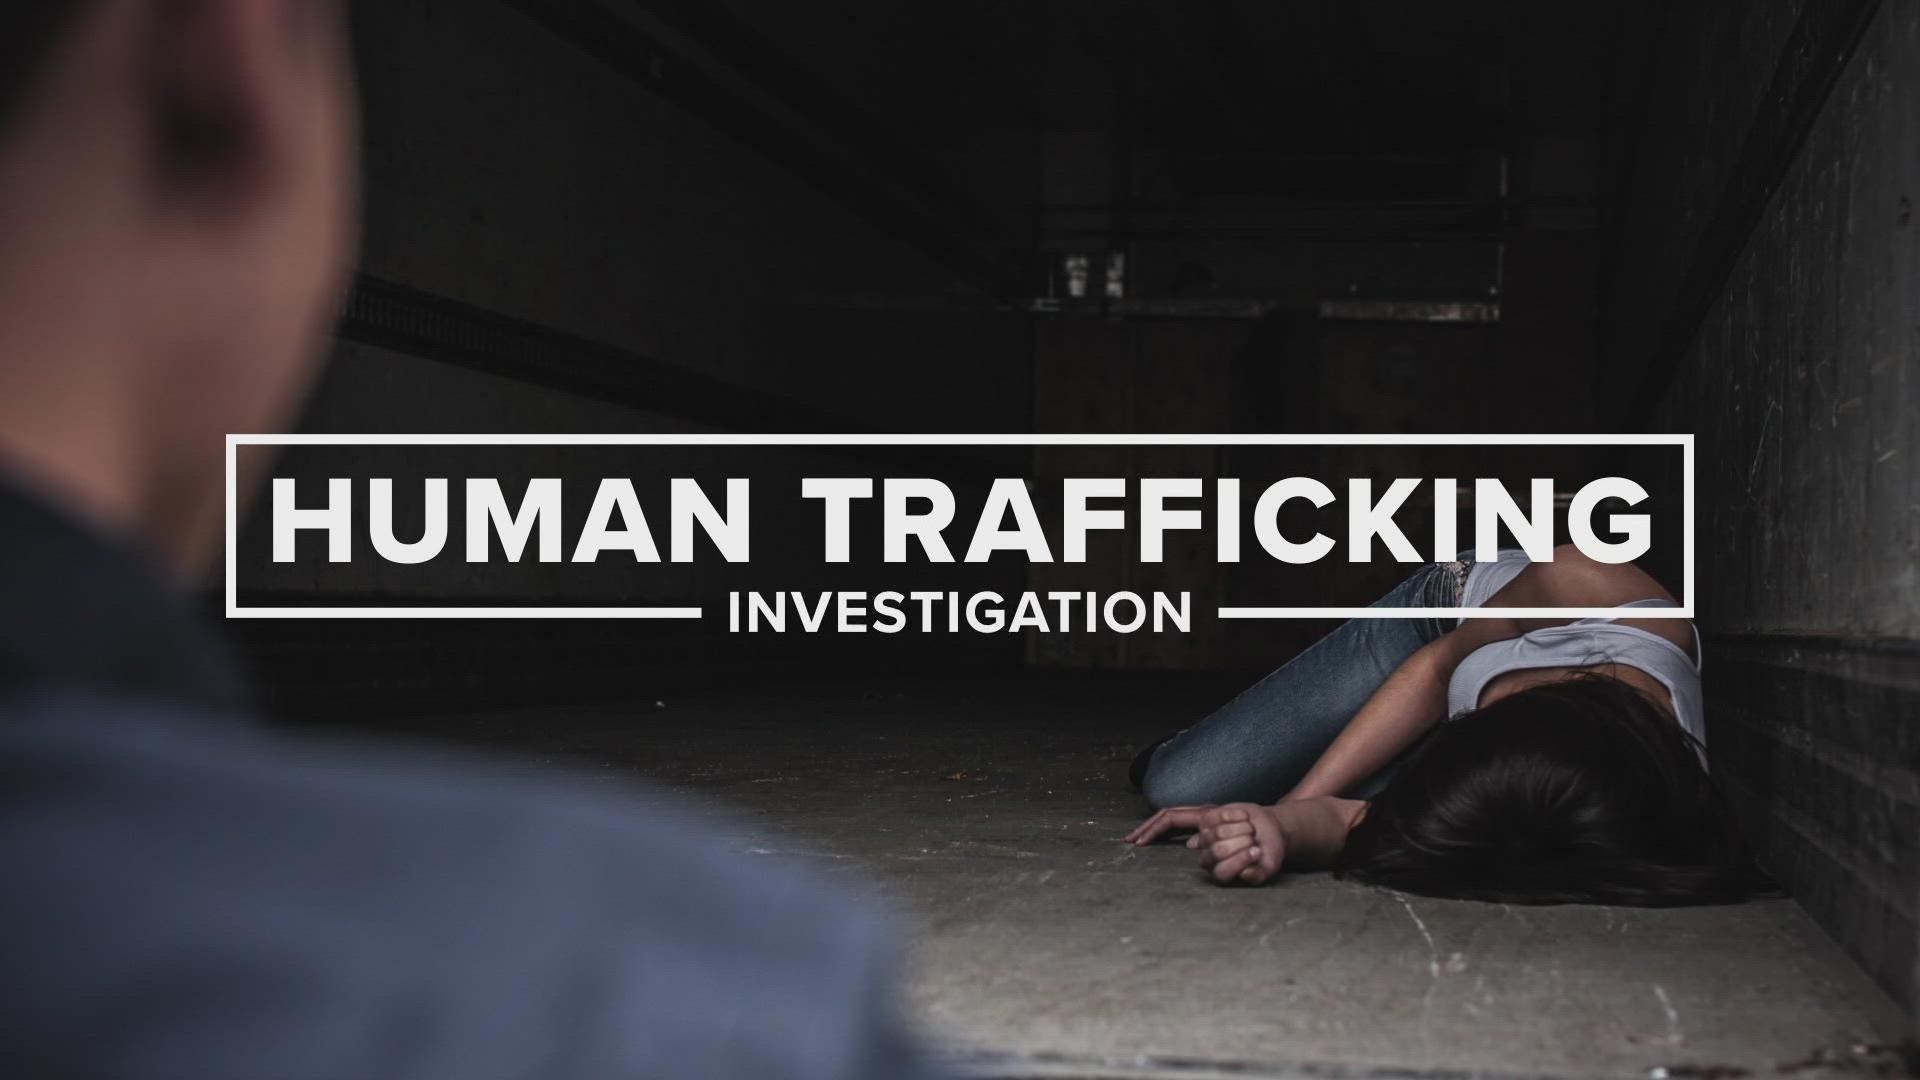 Out of those arrests, a victim of human trafficking was identified and got help from Unbound, a Waco nonprofit that helps human trafficking victims.